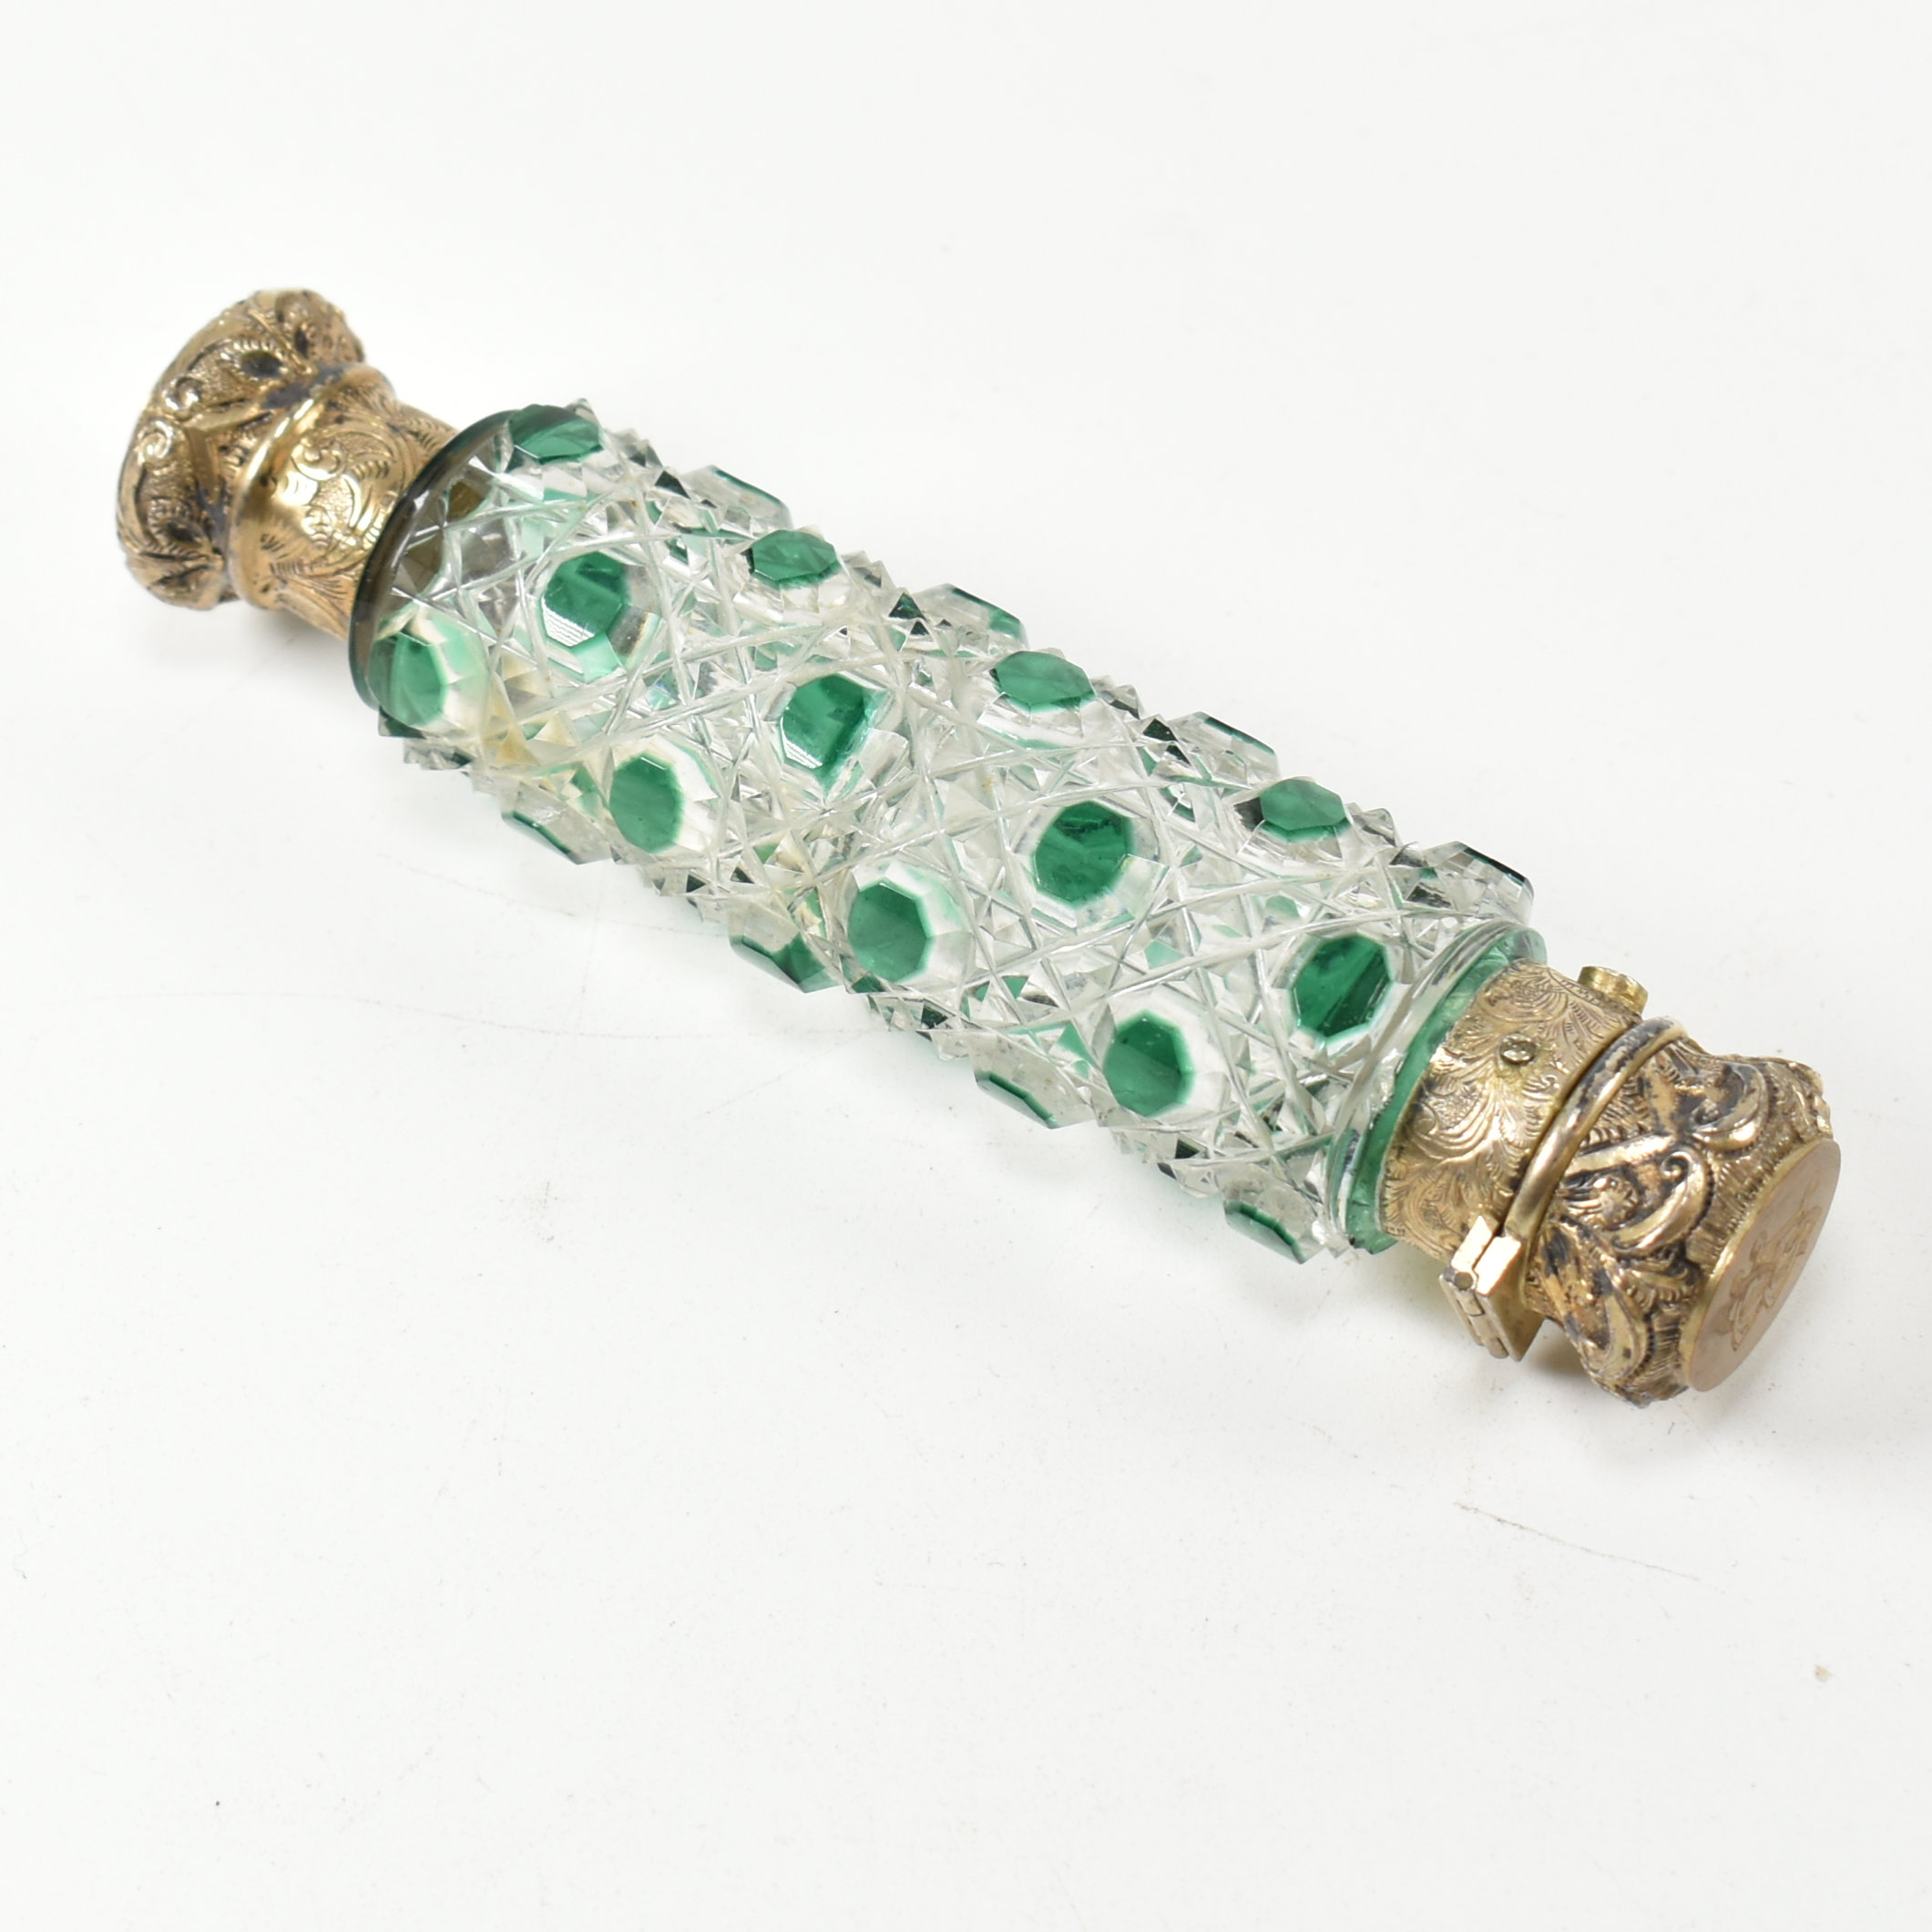 ANTIQUE DOUBLE ENDED GLASS SCENT BOTTLES - Image 5 of 7